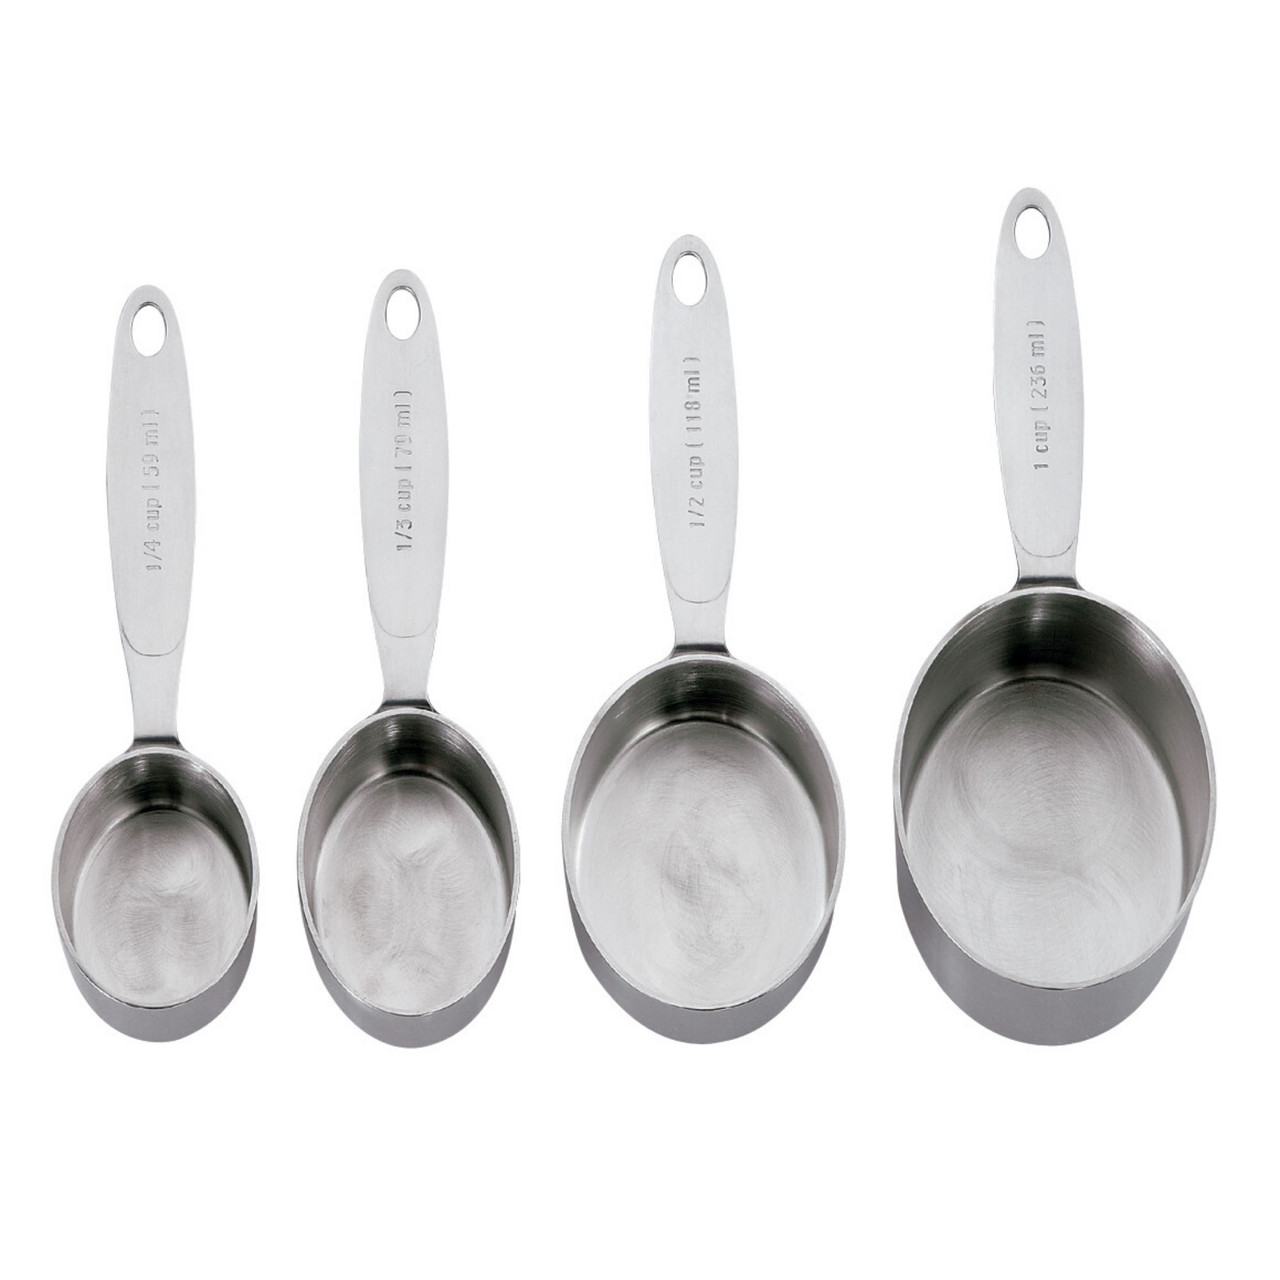 Zyliss Stainless Steel Measuring Cups